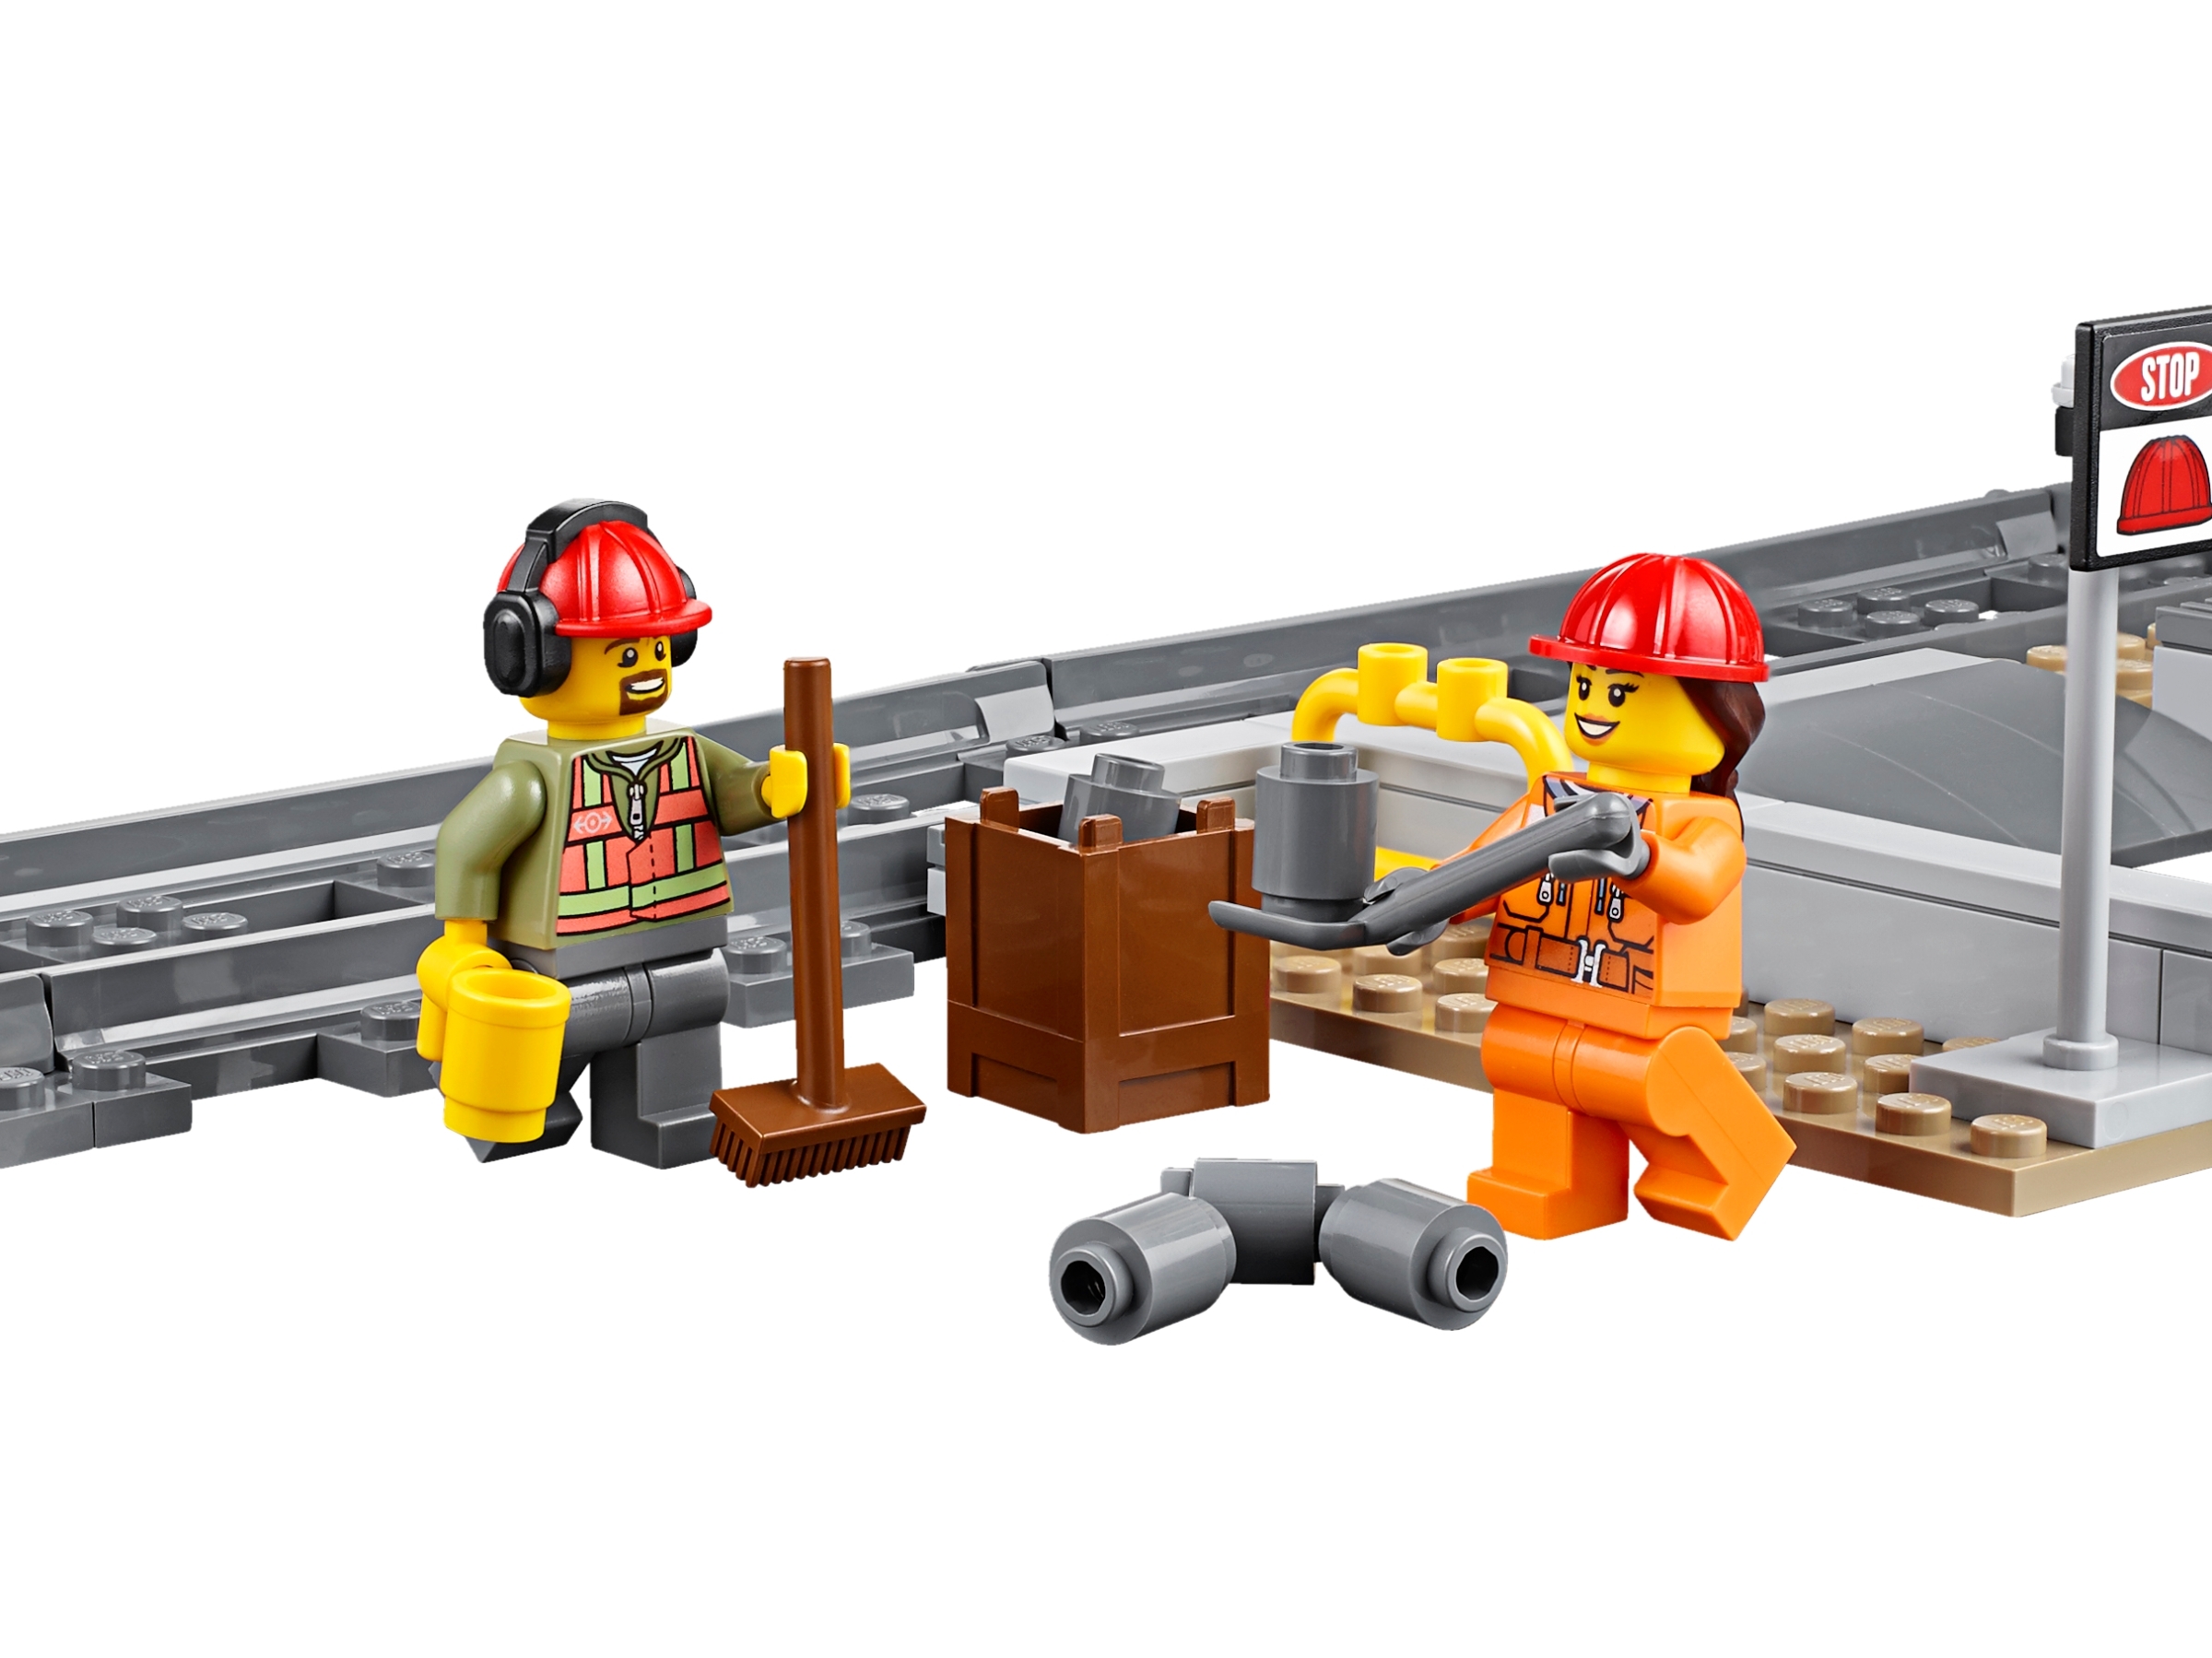 Heavy-Haul Train 60098 | | online at the Official LEGO® Shop